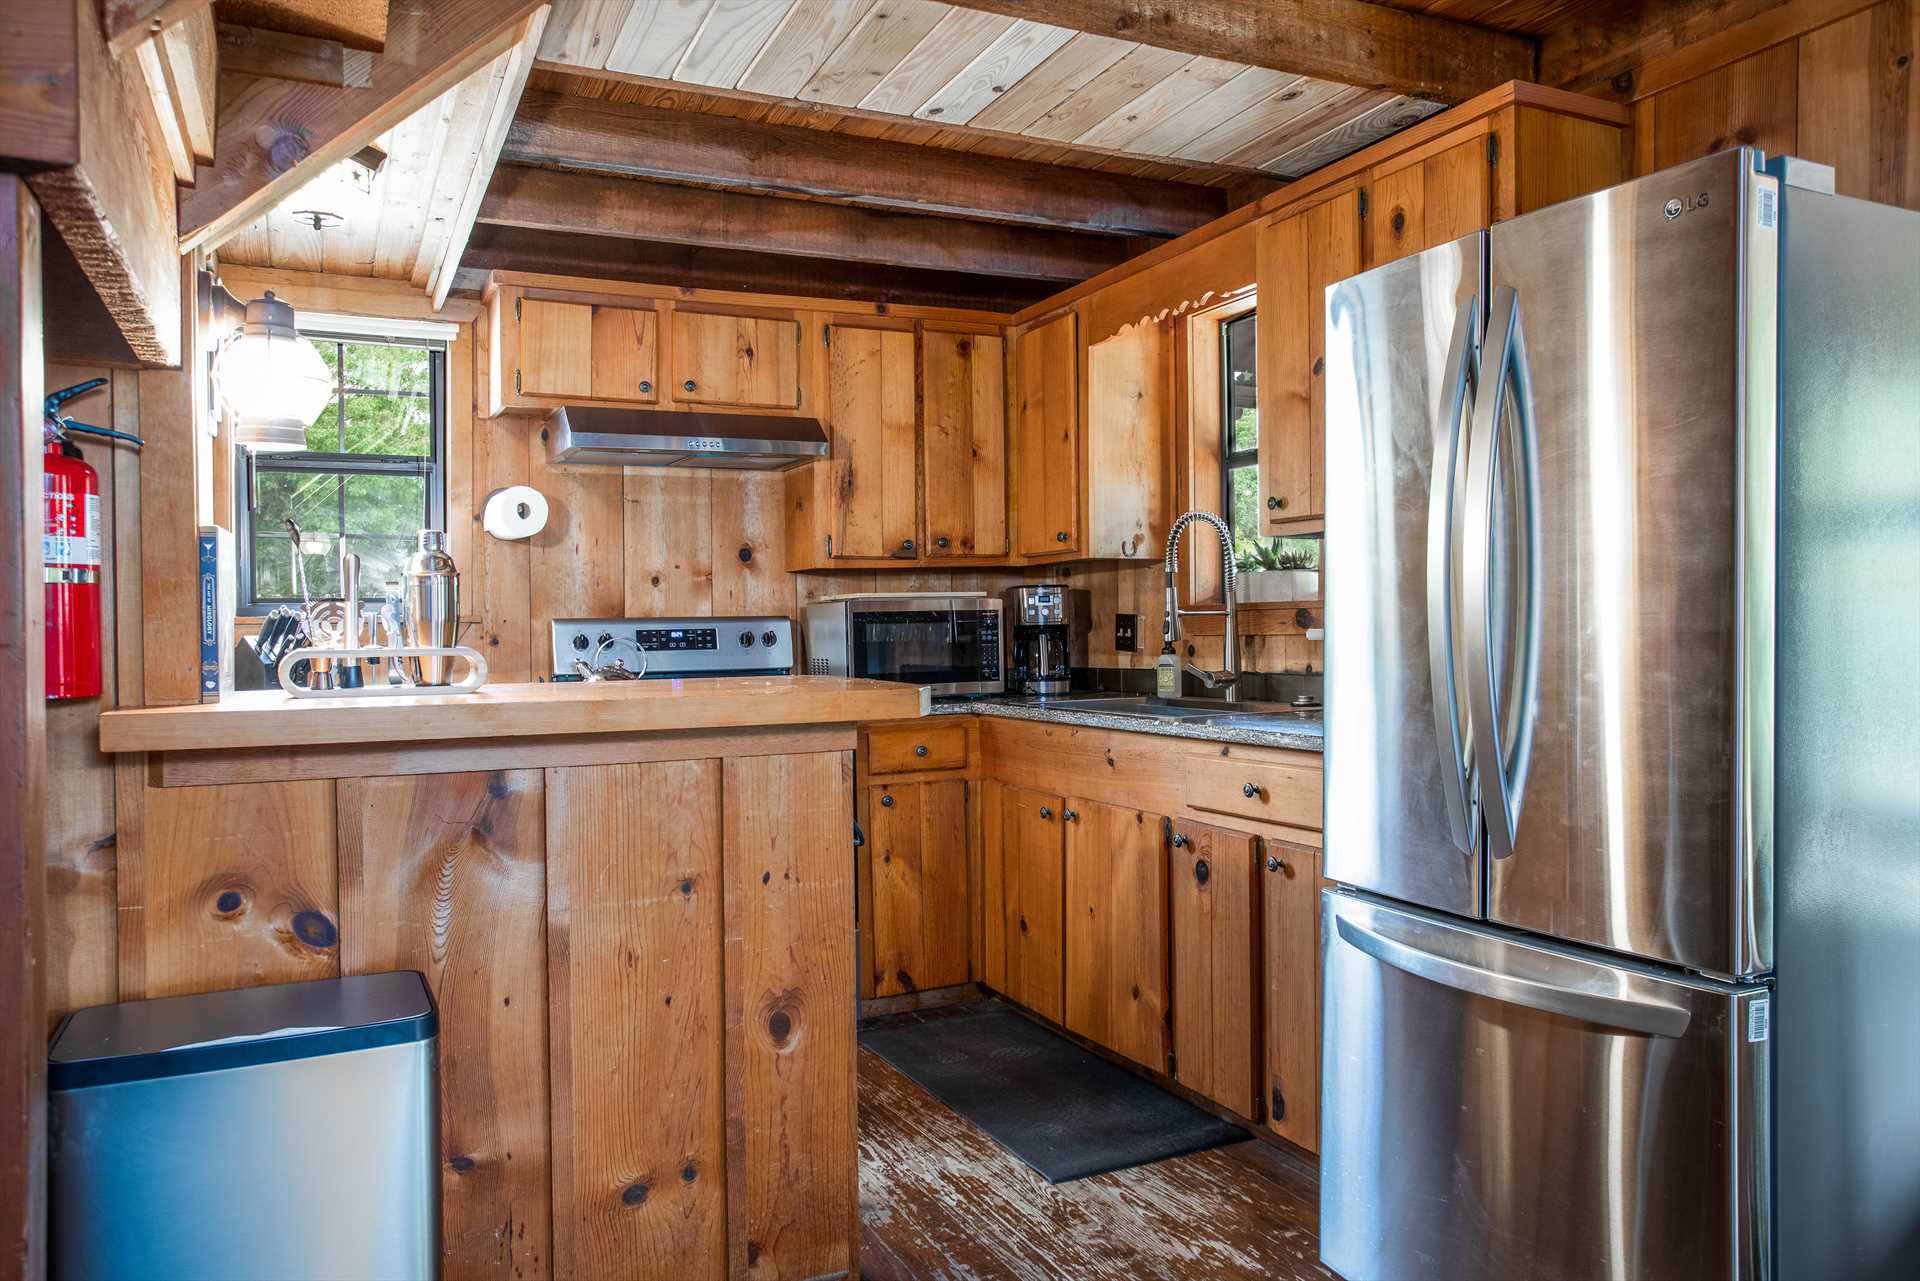                                                 A full array of appliances, as well as cookware, dining ware, utensils, and glasses, await you in the rustic and functional country kitchen!